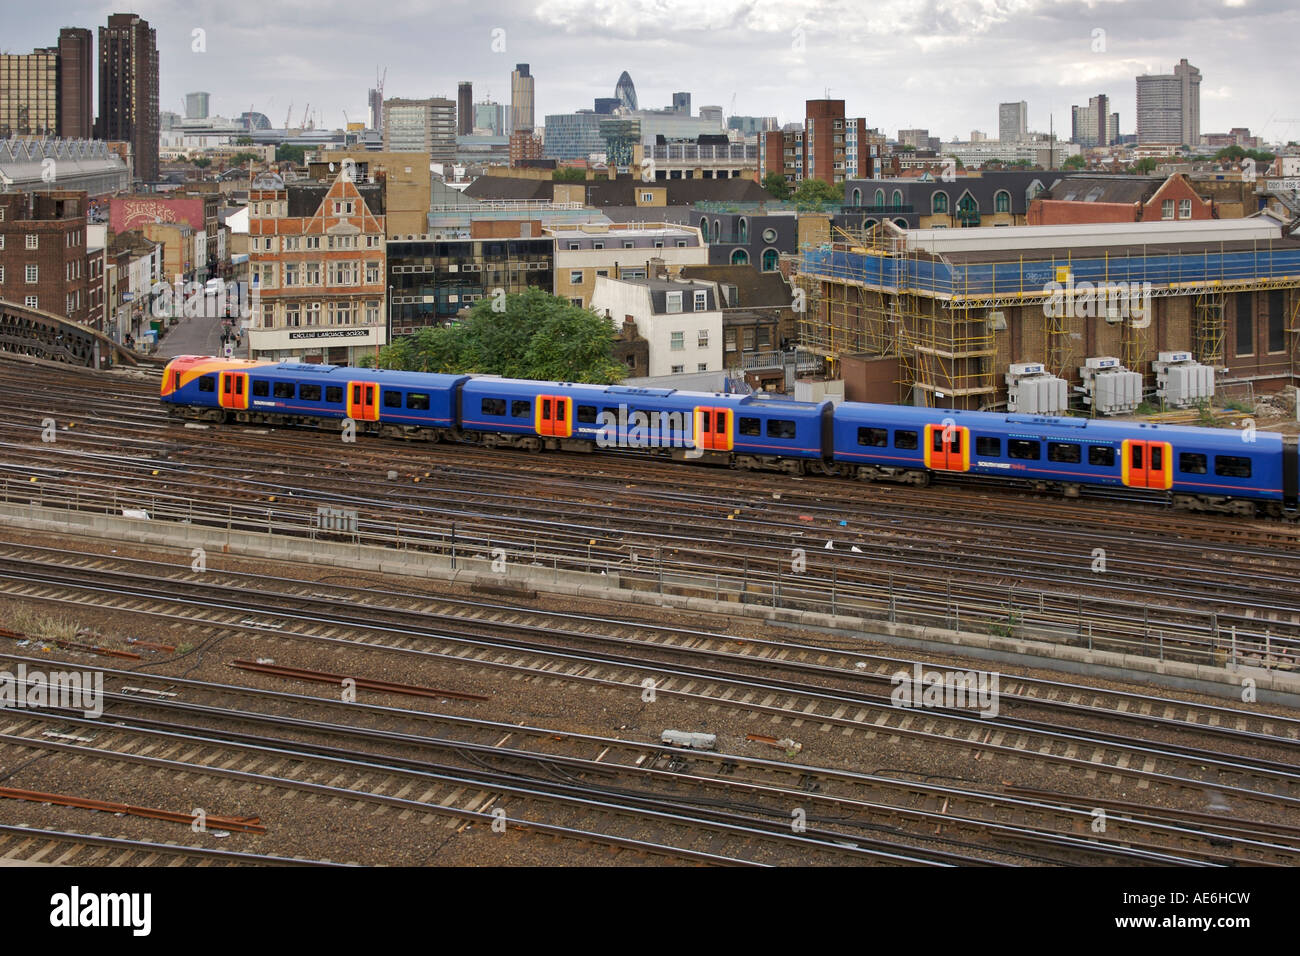 View of a suburban train and rail tracks outside London's Waterloo train station. Stock Photo